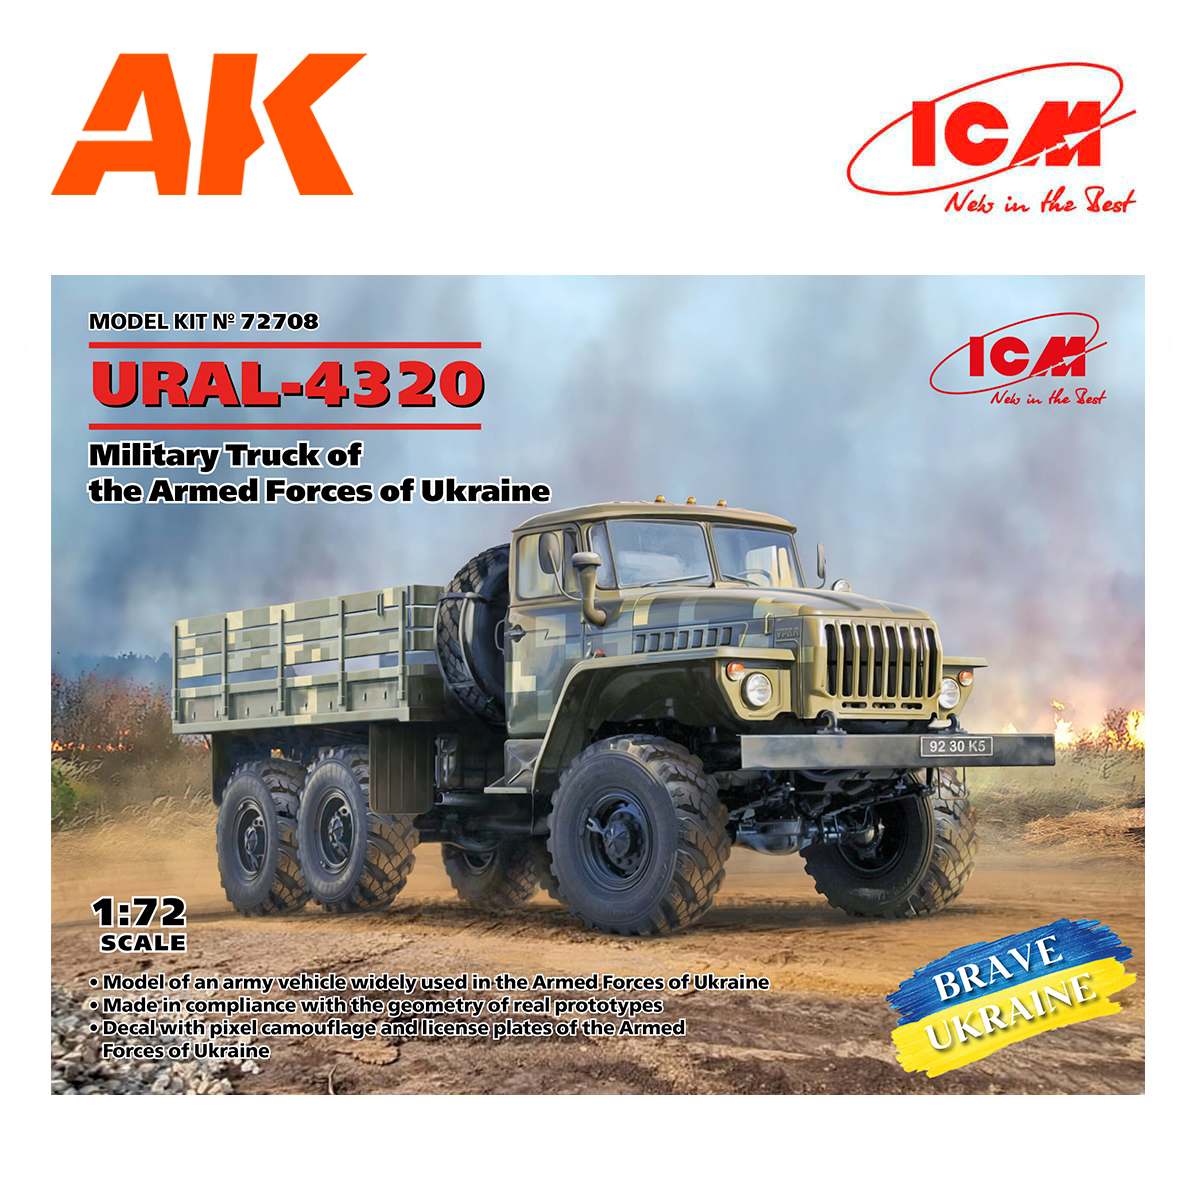 URAL-4320, Military Truck of the Armed Forces of Ukraine 1/72